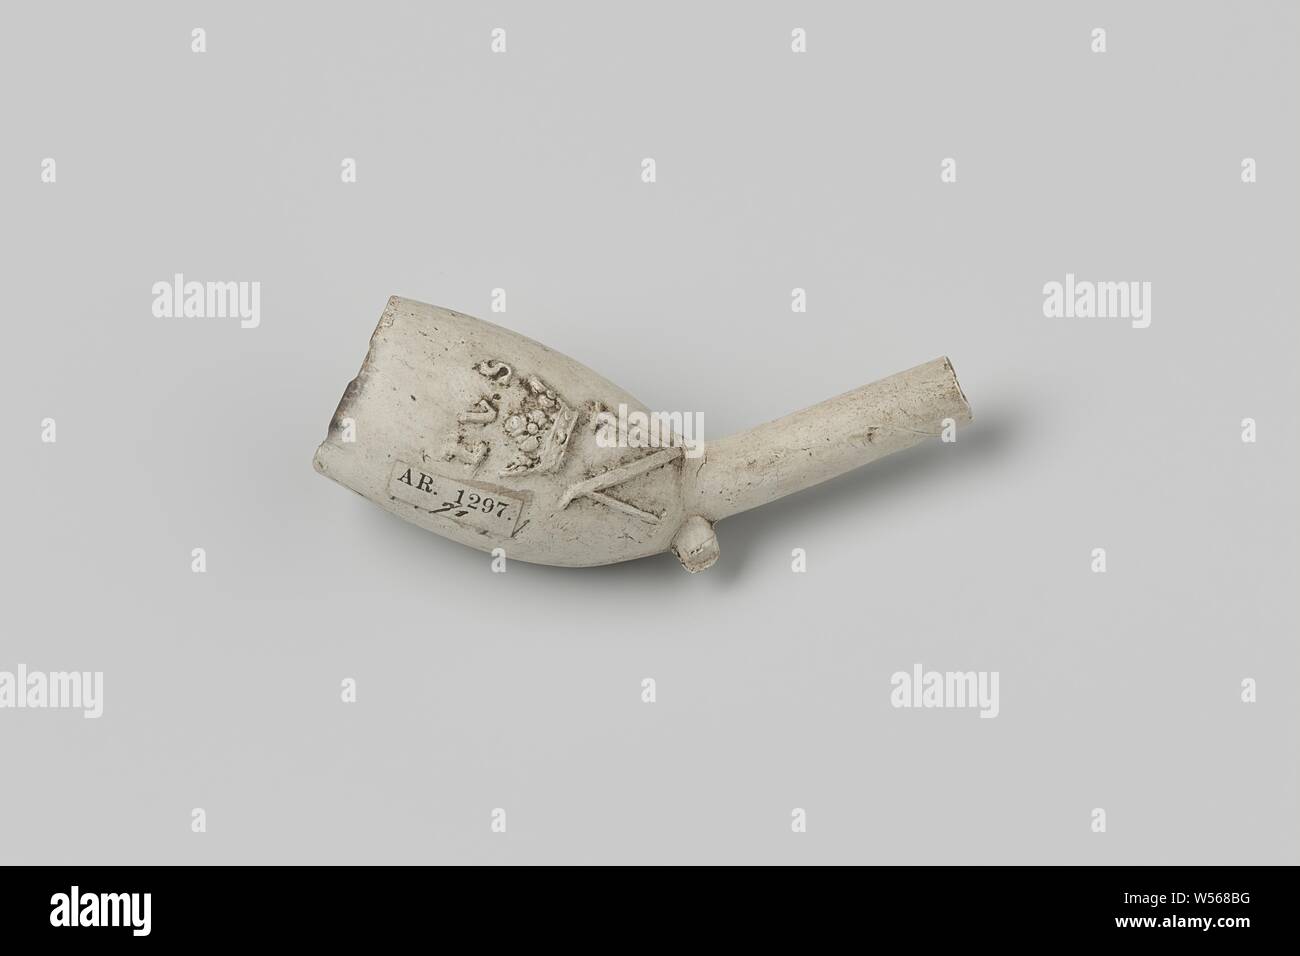 Fragment tobacco pipe, Fragment tobacco pipe with a crown and the letters I S S and N shown. From the excavations at Hofstede Arentsburg 1827-1831 under the supervision of Professor Reuvens, anonymous, c. 1400 - c. 1950, pipe clay, l 4.1 cm × w 2.2 cm l 6.6 cm Stock Photo